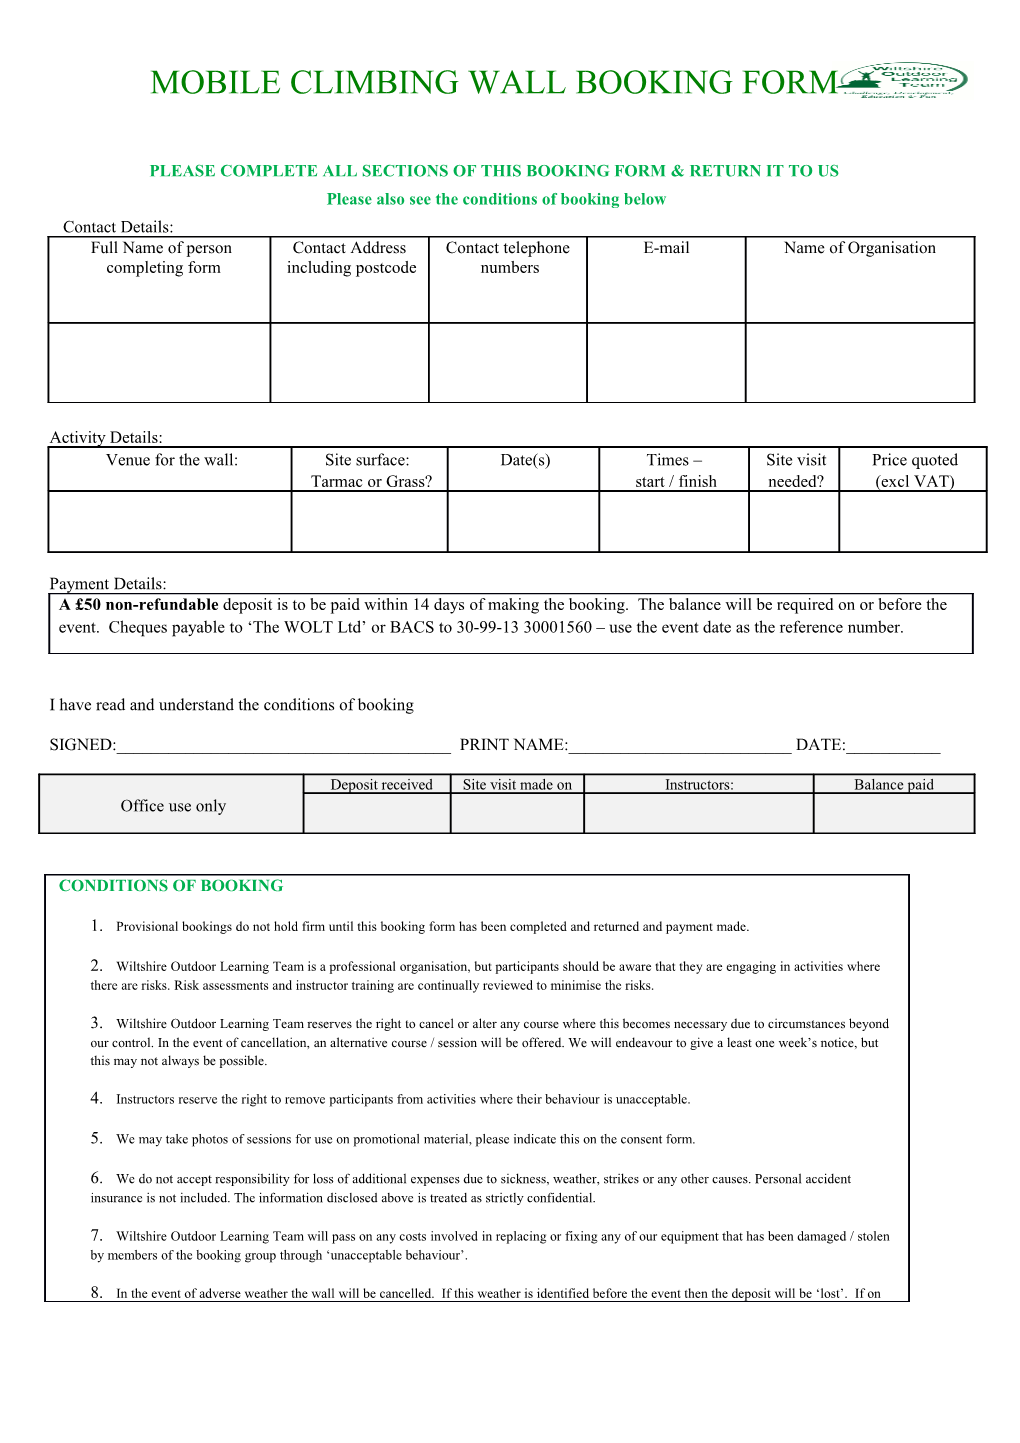 Please Complete All Sections of This Booking Form & Return It to Us